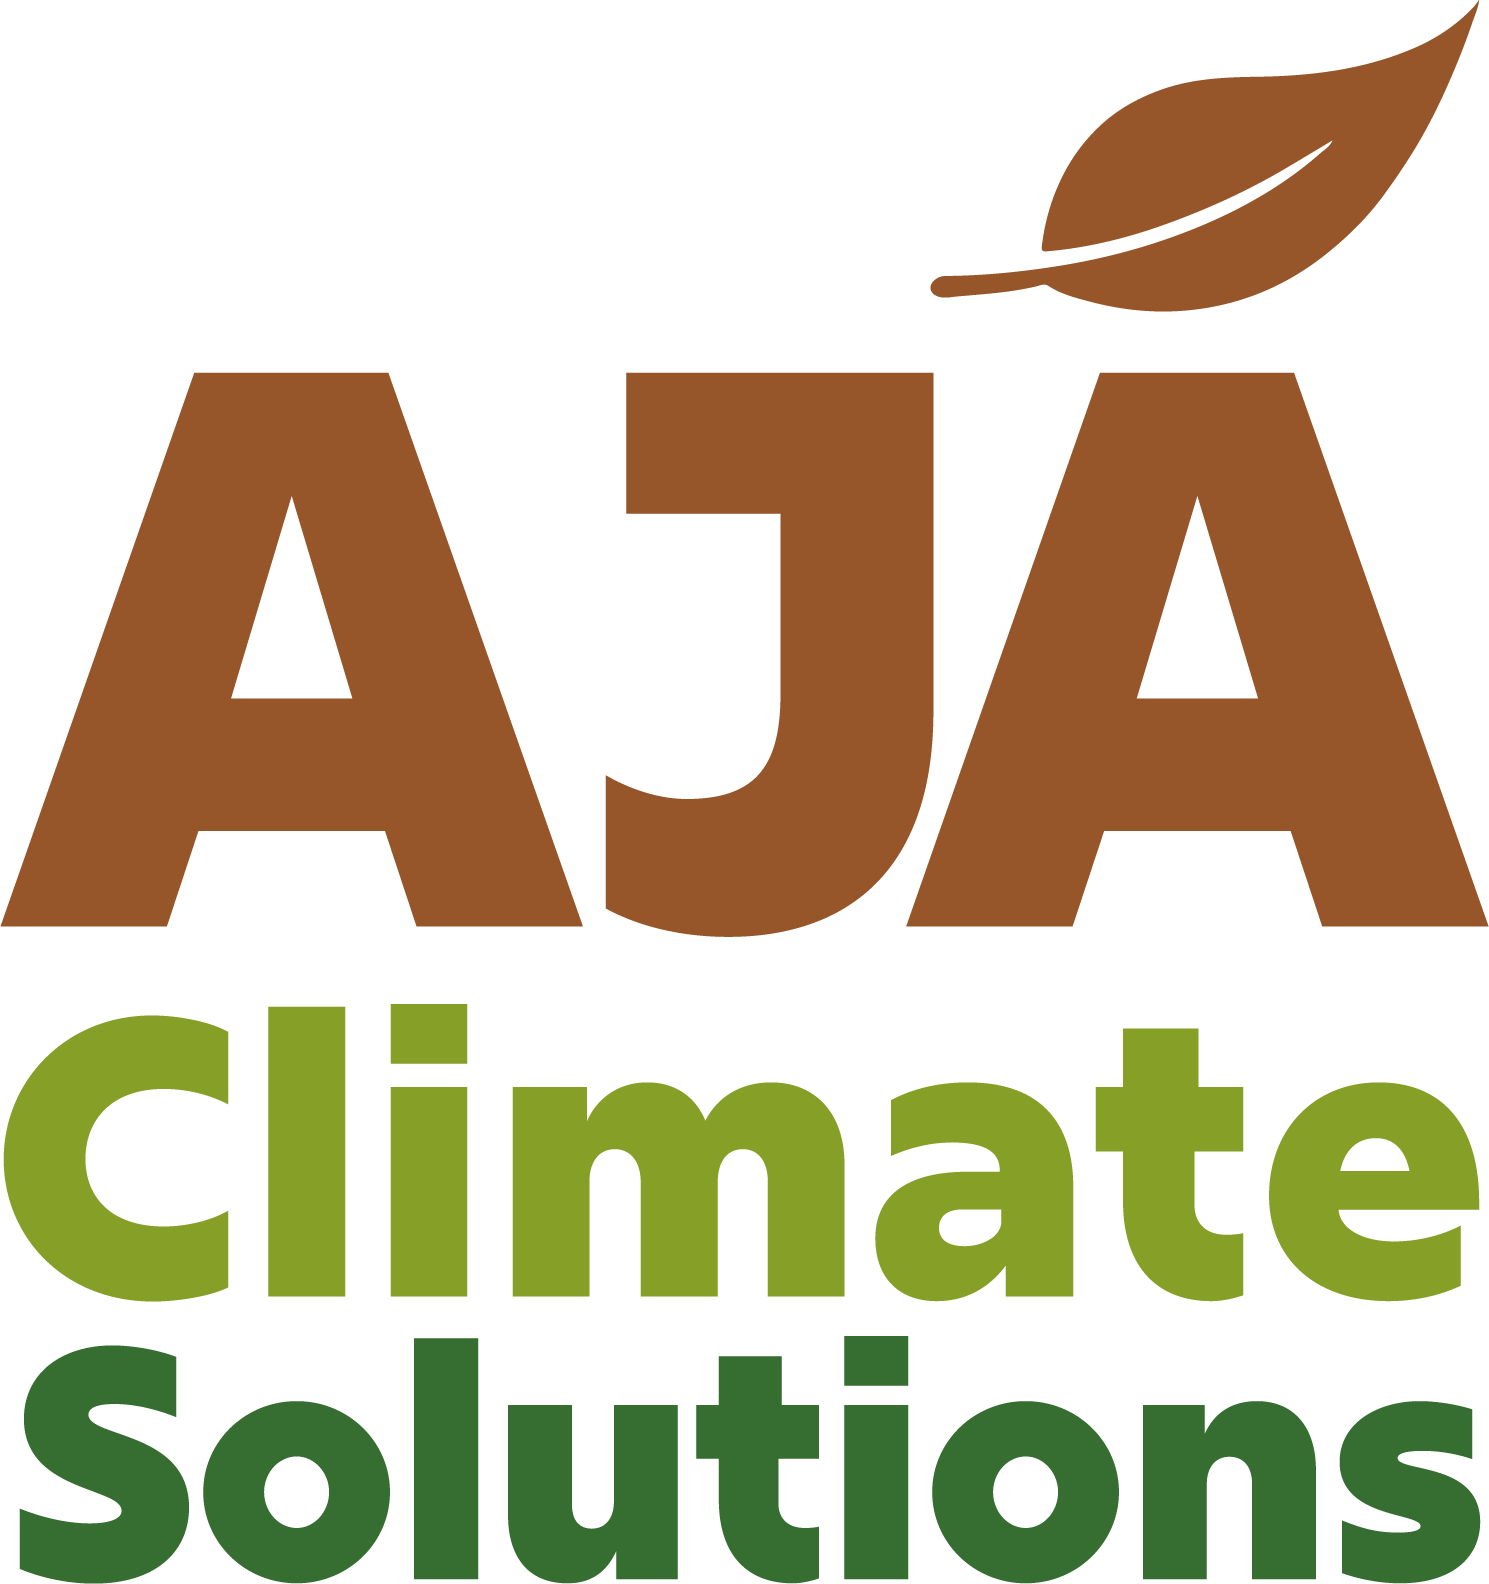 AJA Climate Solutions